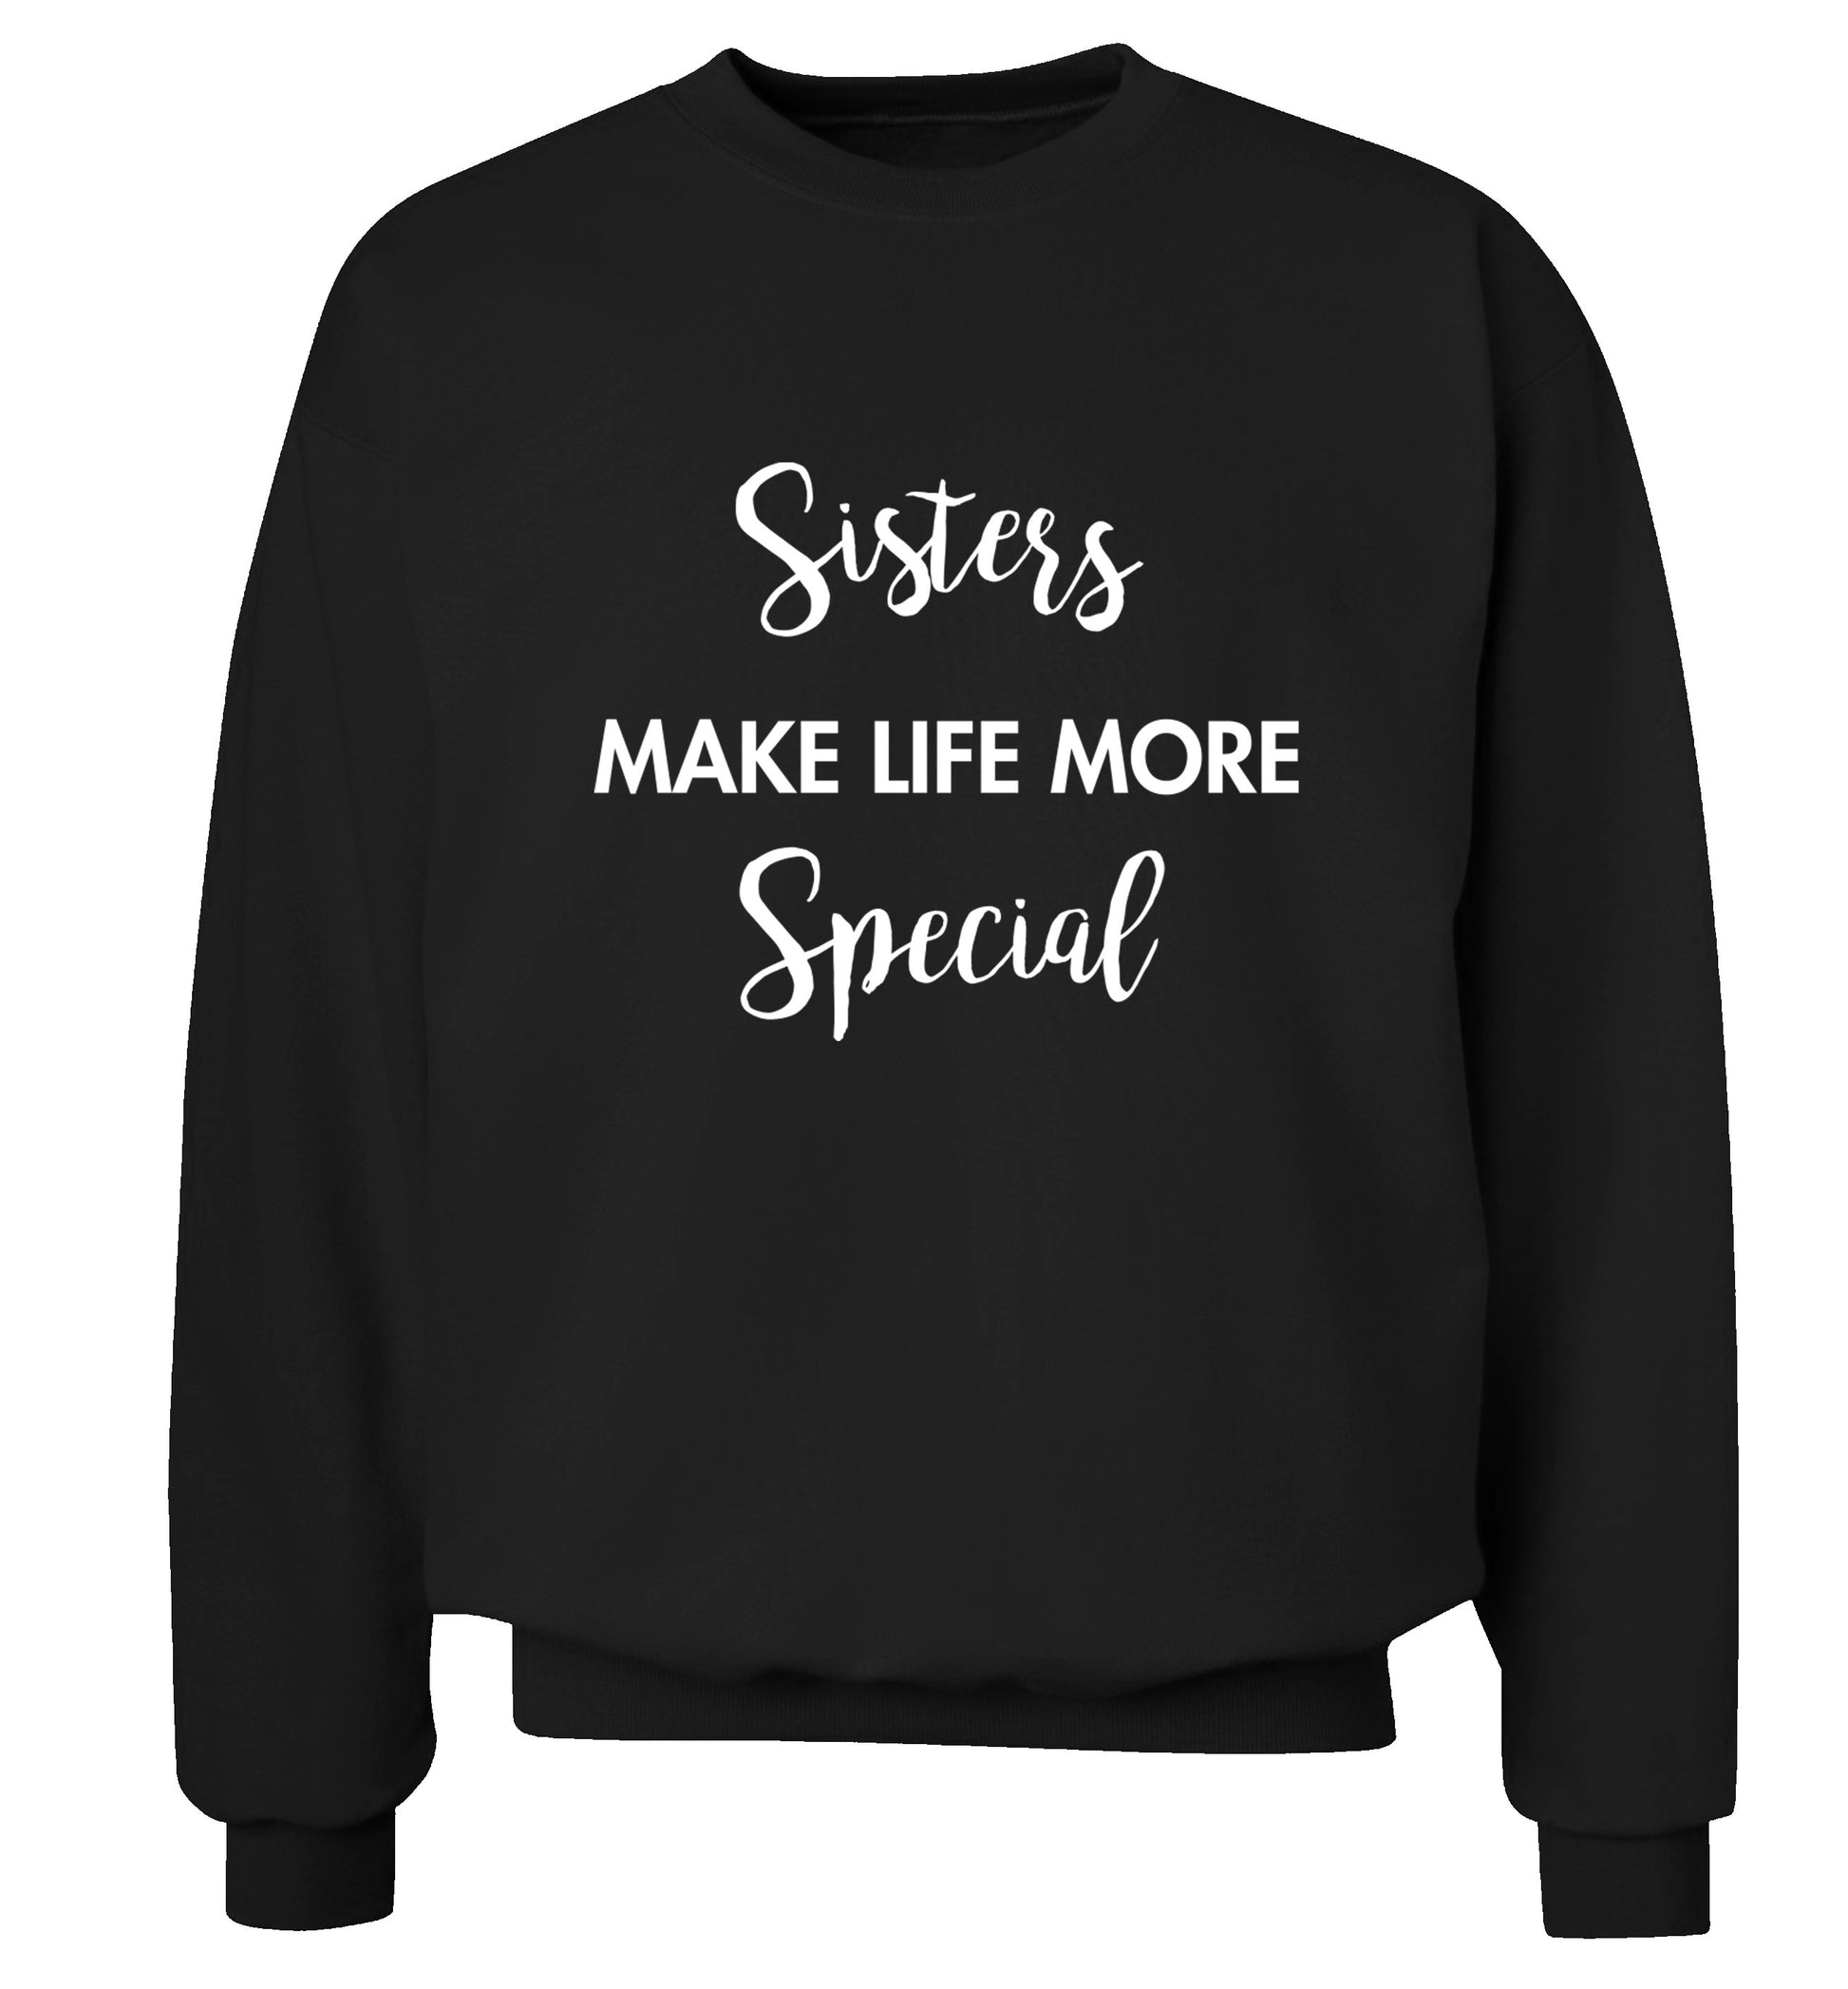 Sisters make life more special Adult's unisex black Sweater 2XL